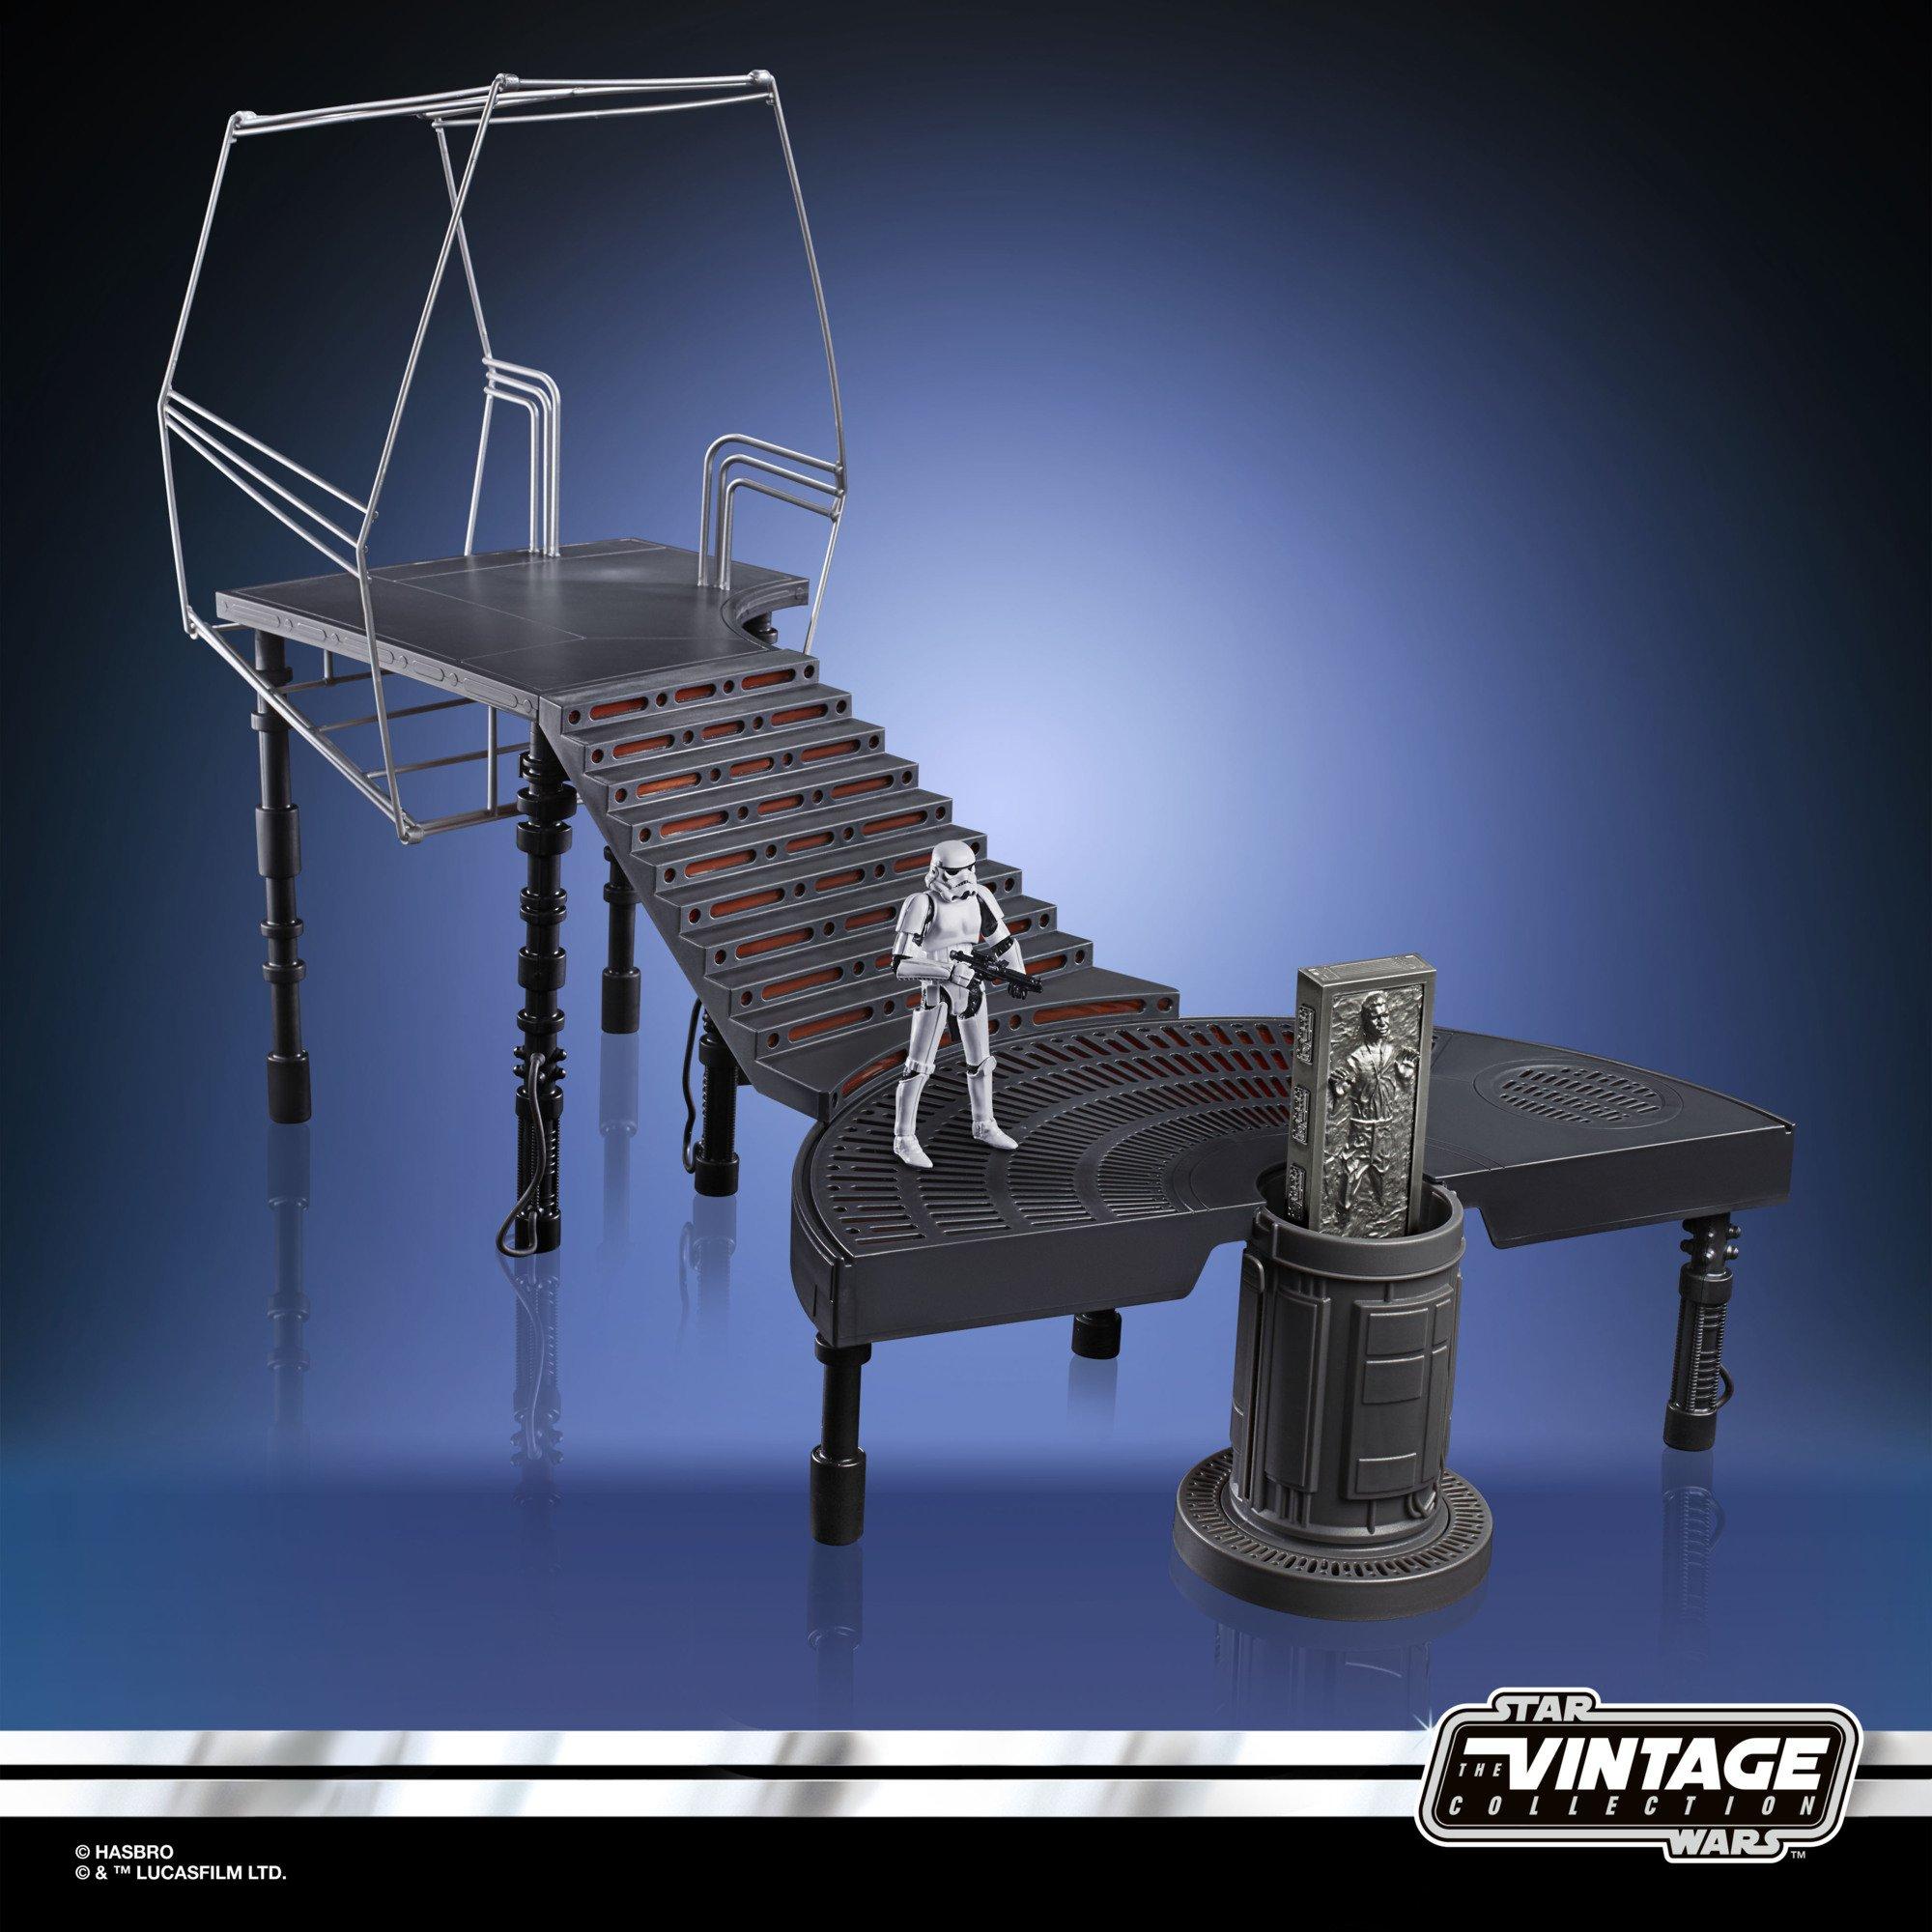 Hasbro Star Wars: The Vintage Collection The Empire Strikes Back Carbon-Freezing Chamber Action Figure Playset